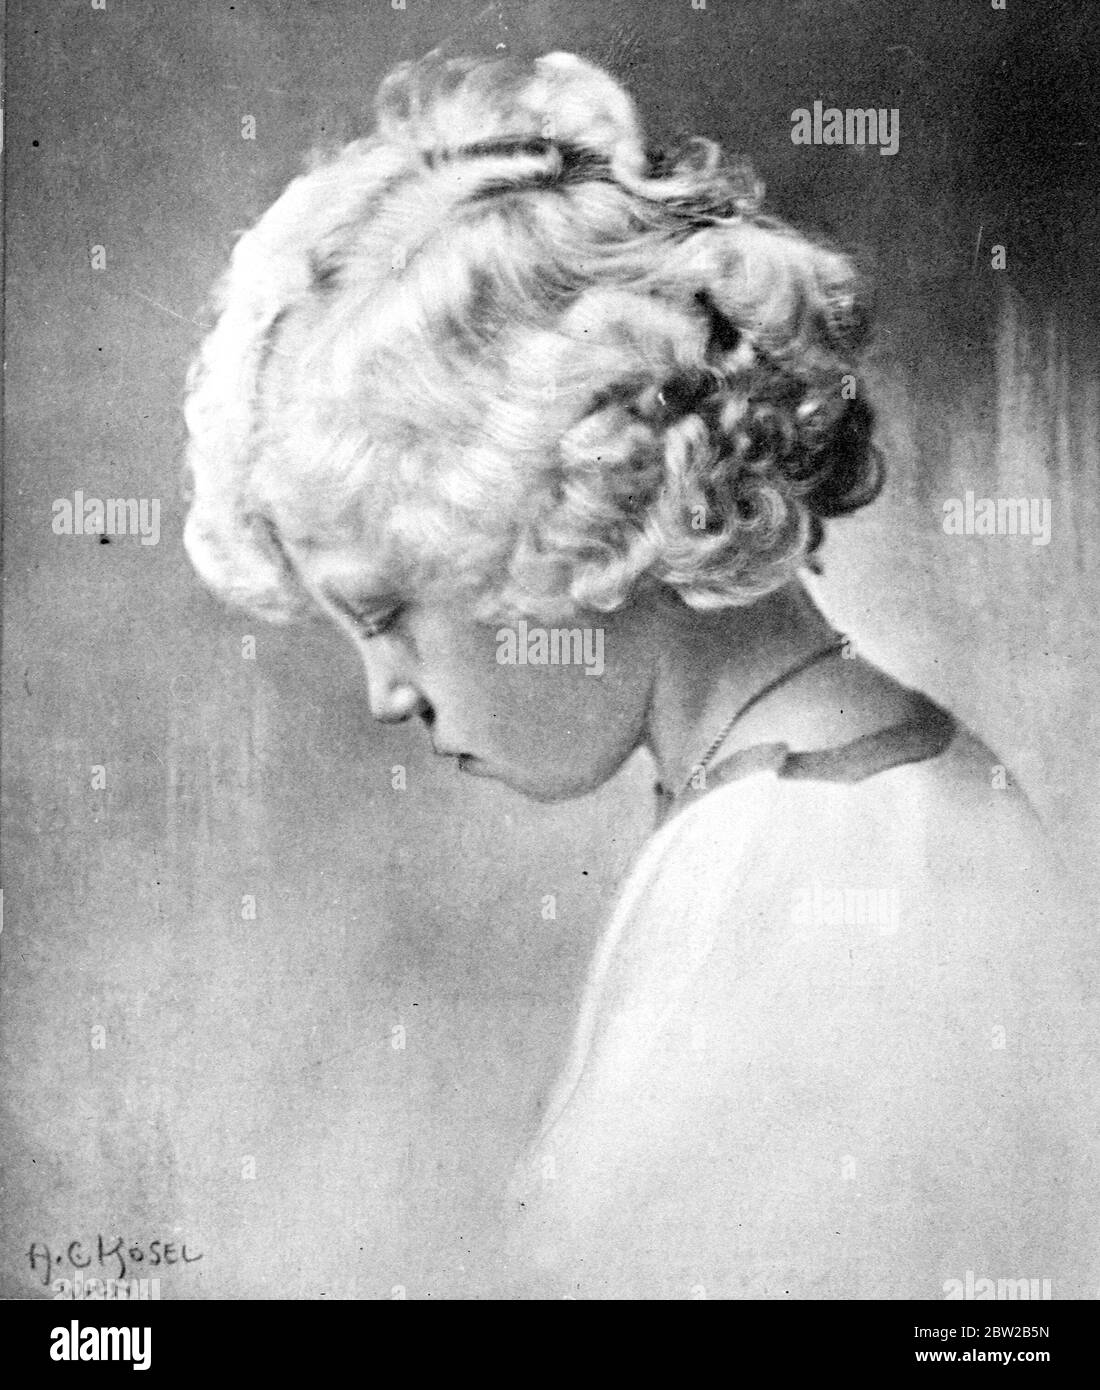 Stolen Royal child: Princess Marie-Gabrielle of Austria [article on front page of Daily Express on 7 November 1932] 7 November 1932 Stock Photo